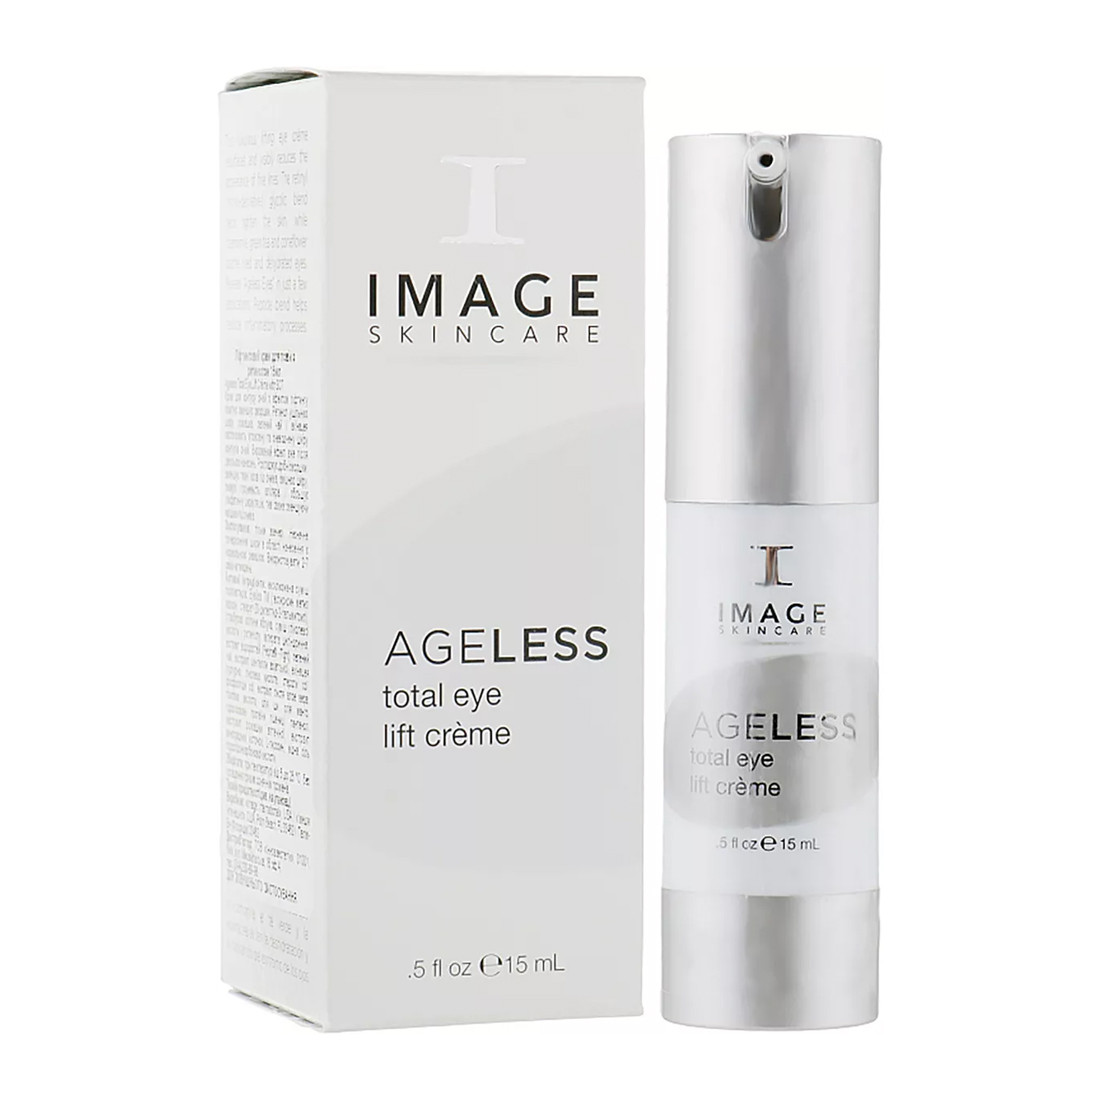 image skincare ageless total eye lift cream with sct цена